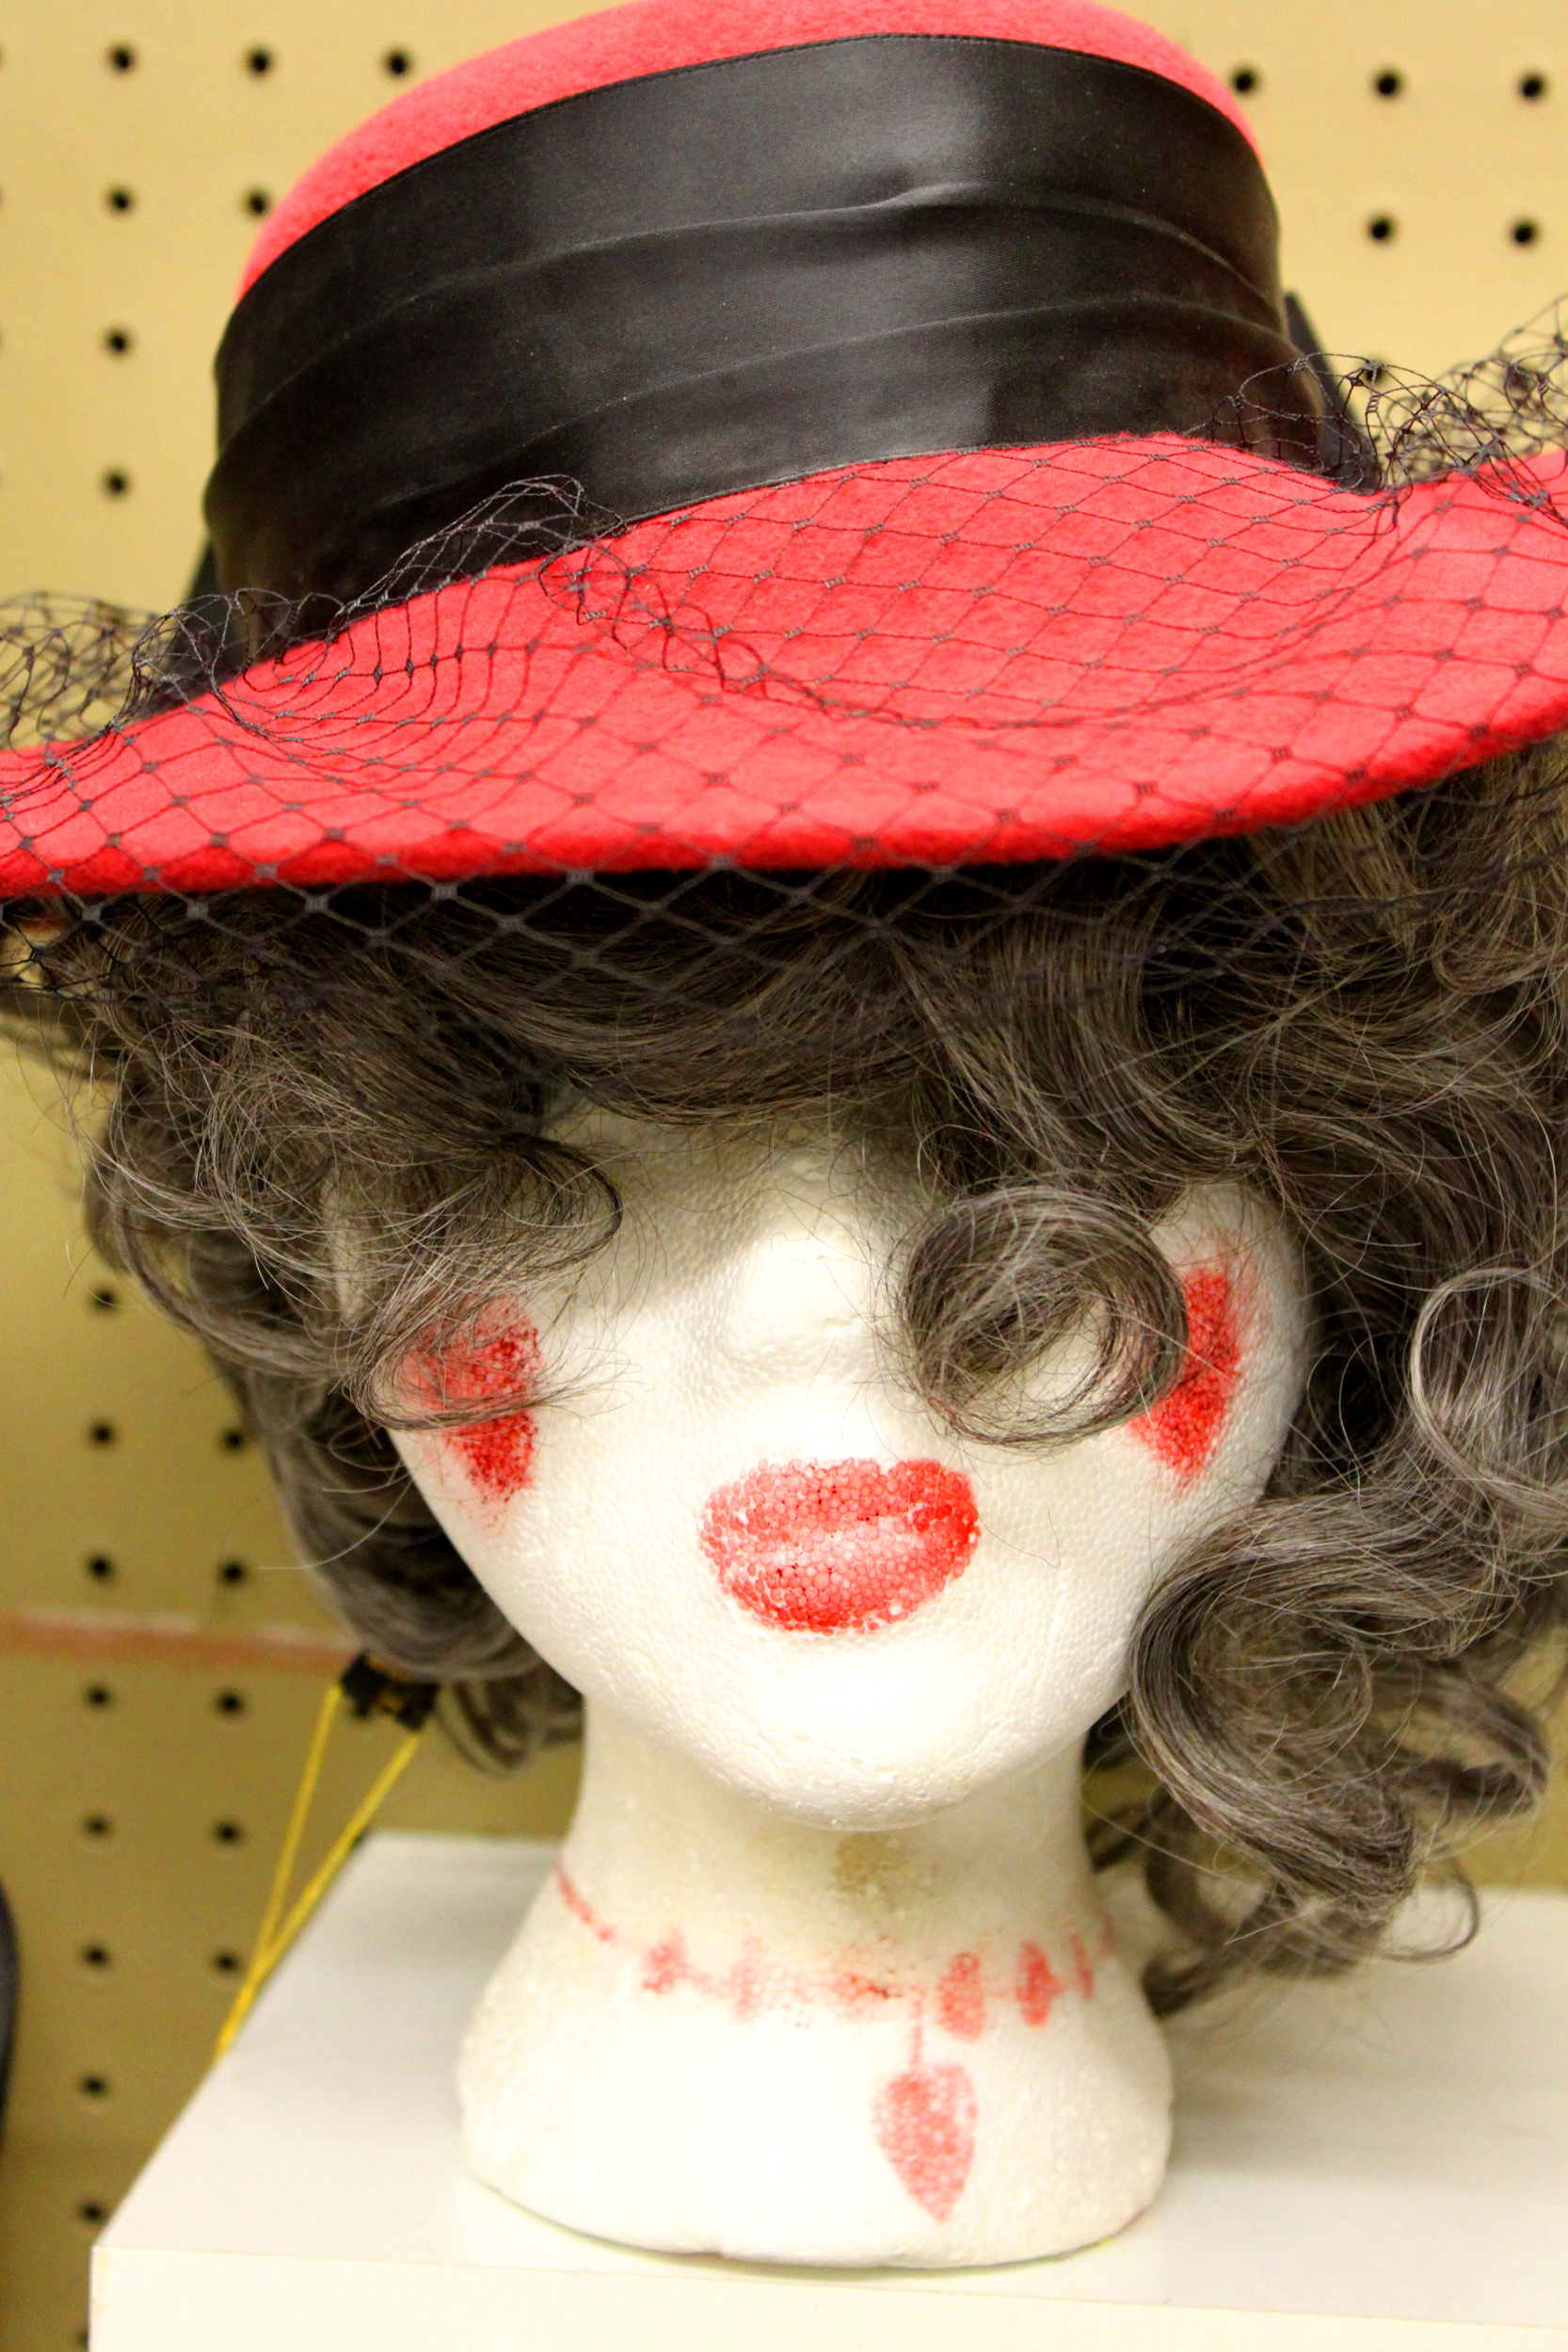 Mannequin in red hat photo